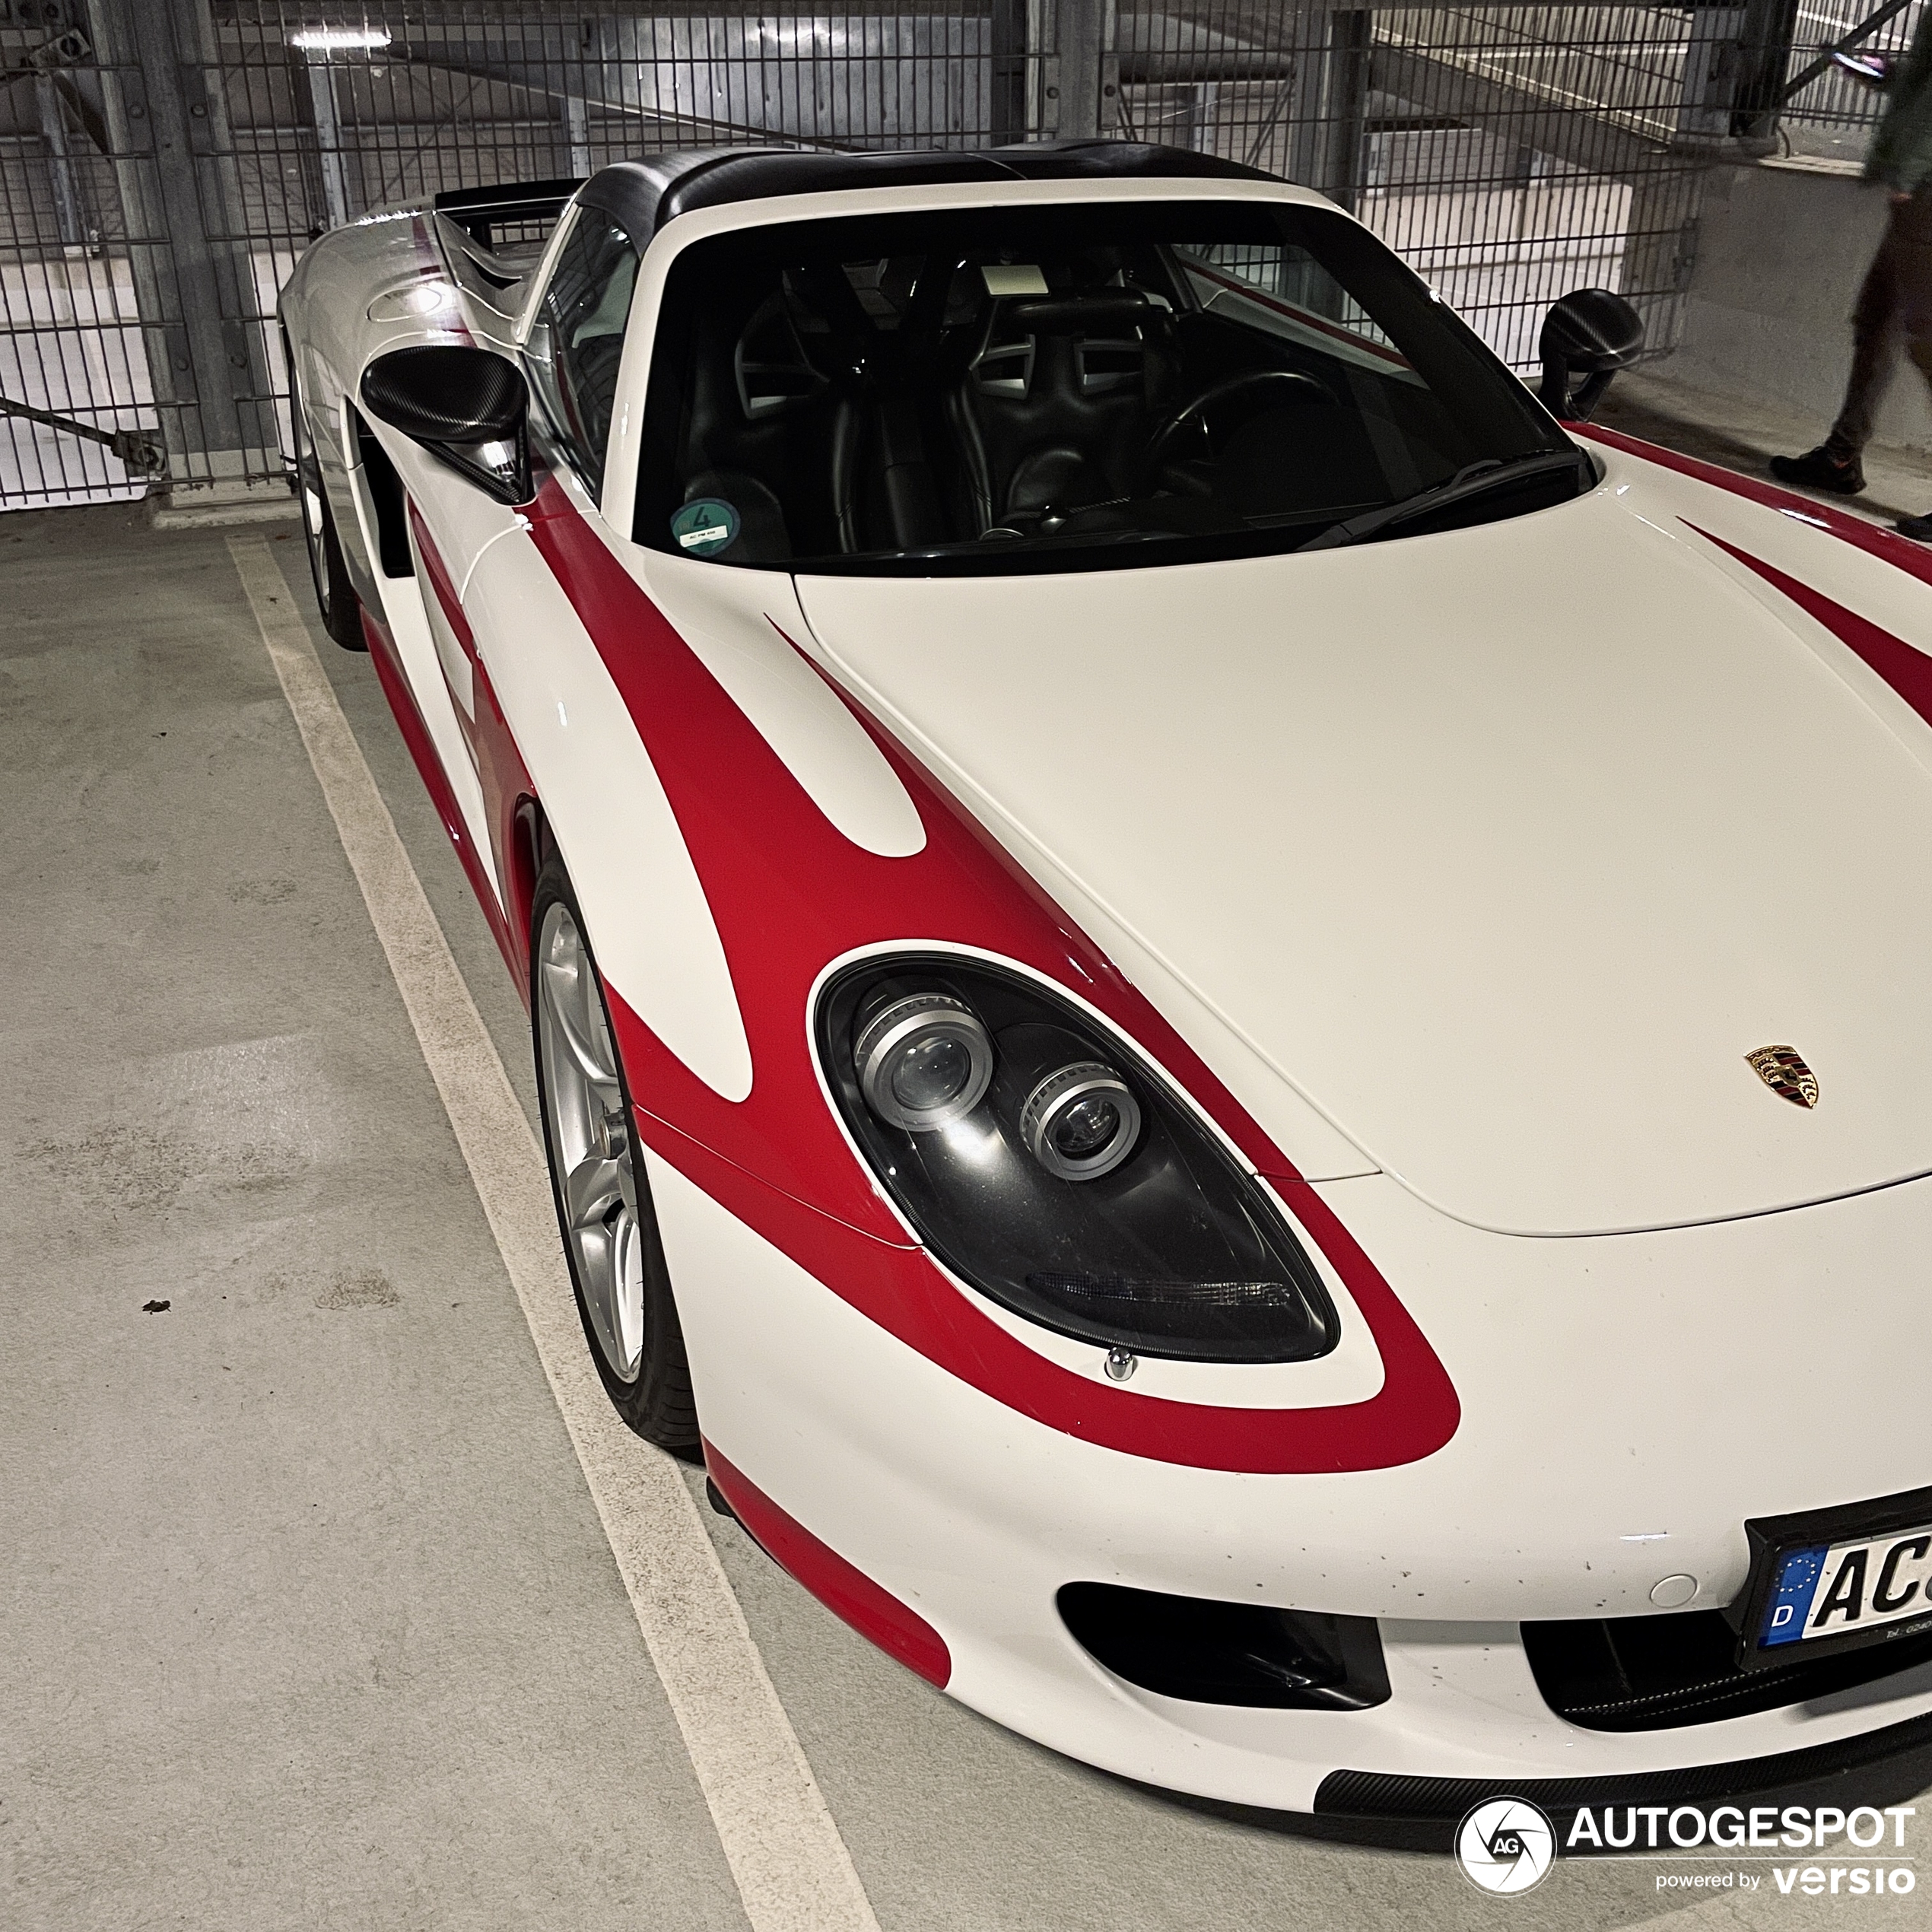 Have you ever seen a Carrera GT with the Salzburg livery?